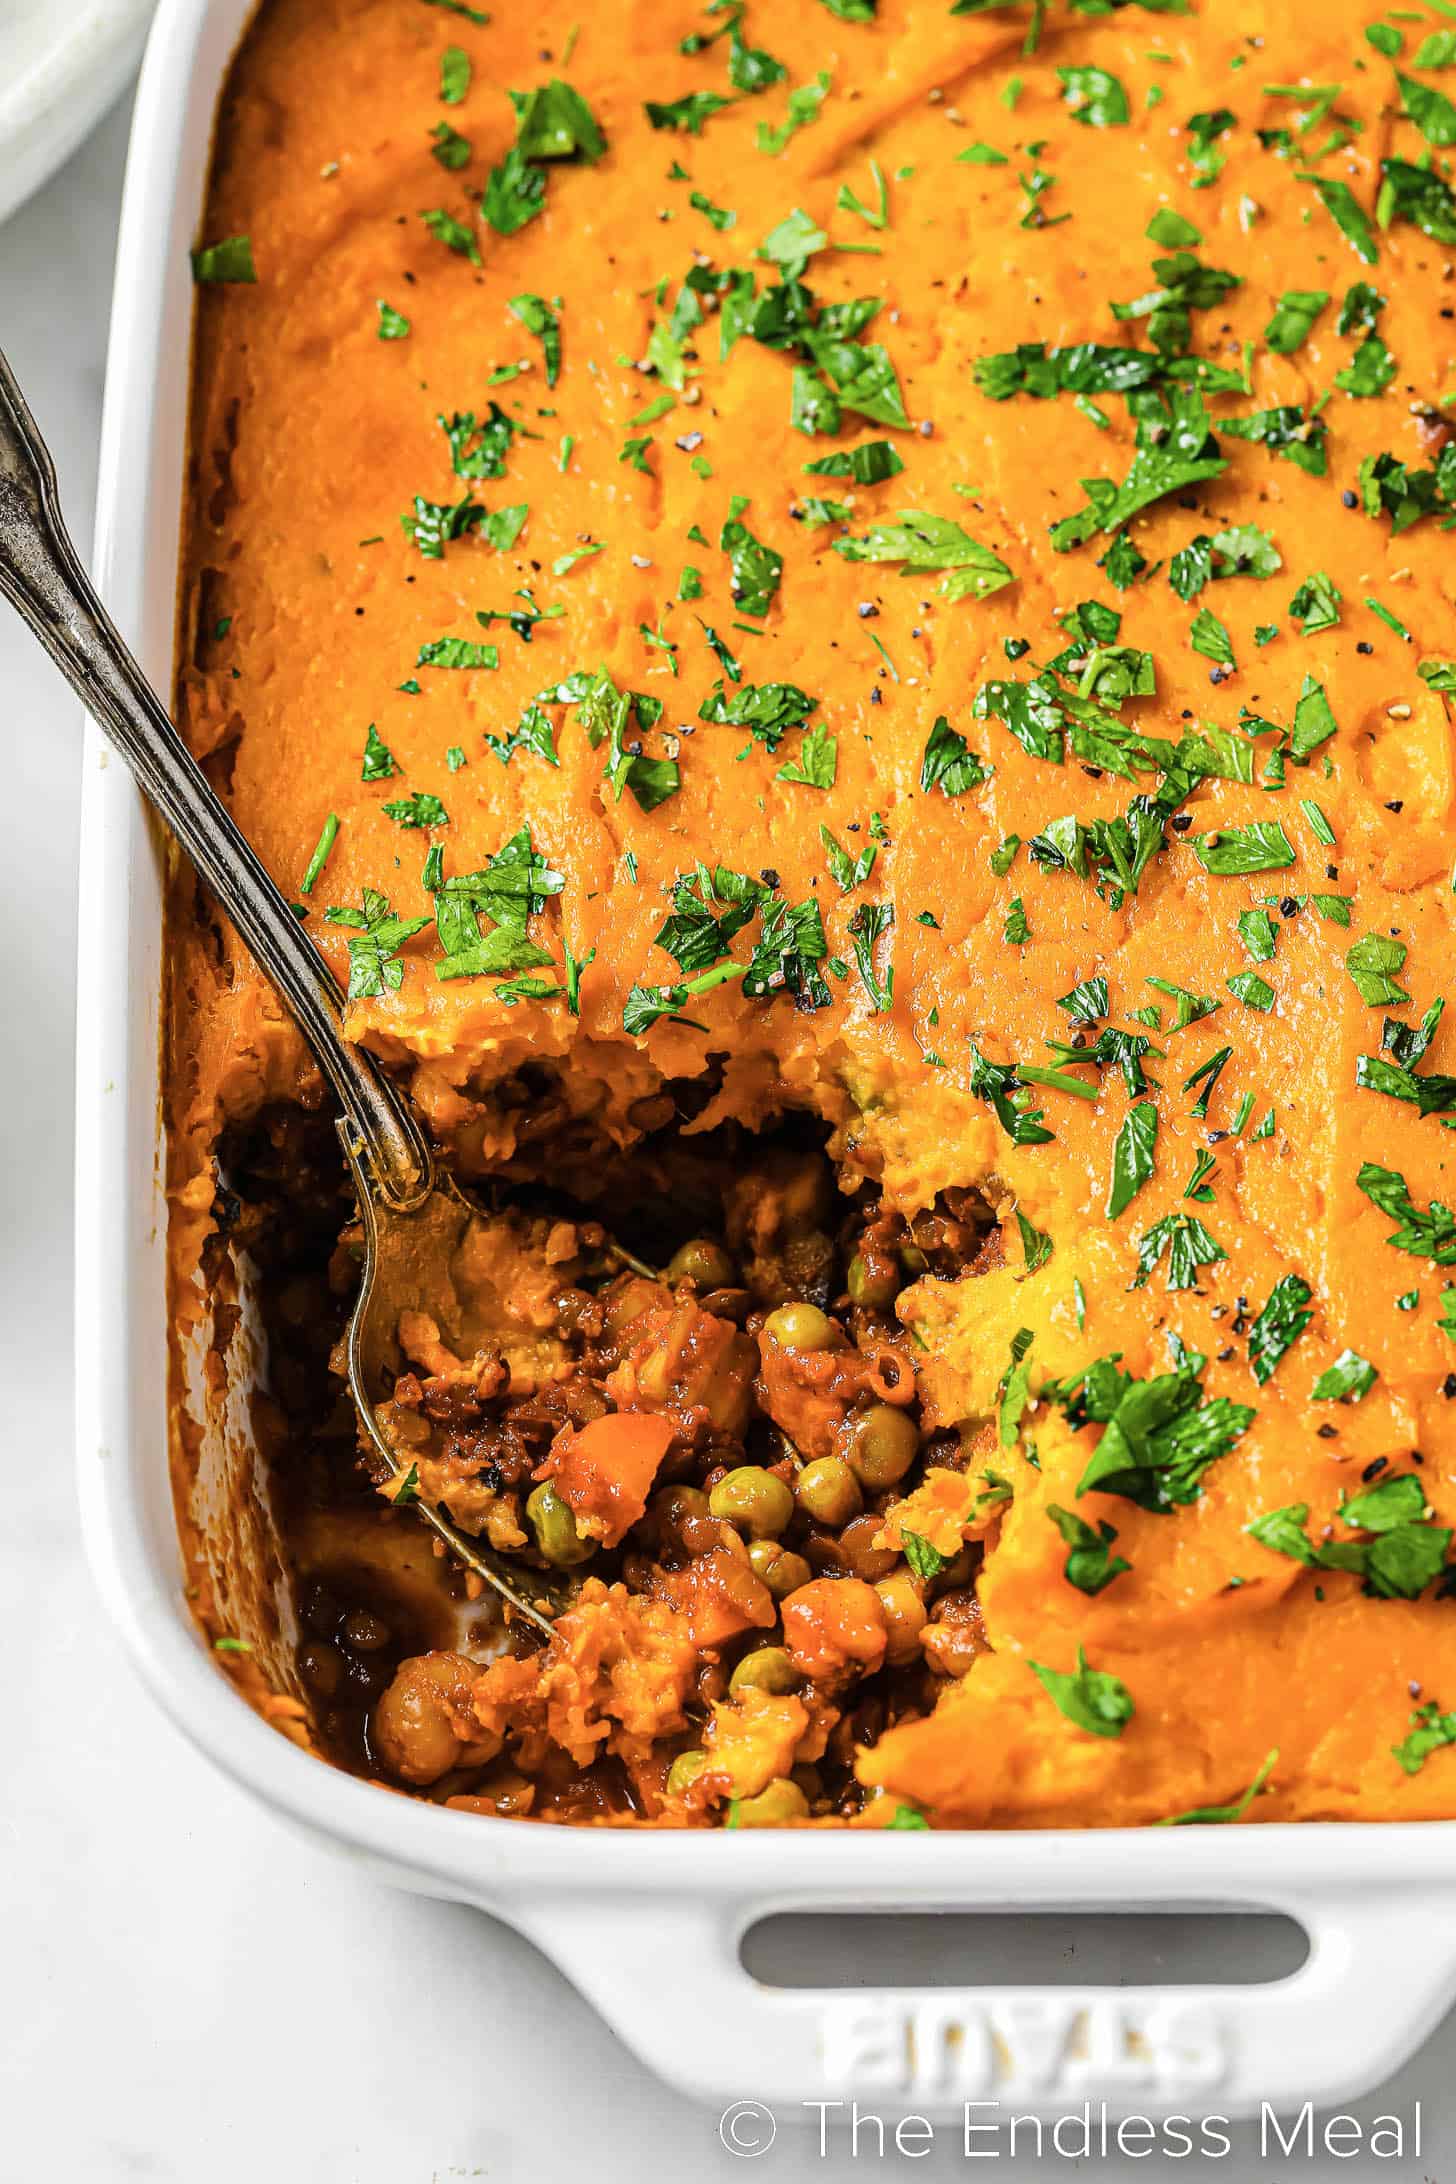 a spoon scooping some curried Vegan Shepherd's Pie from a casserole dish